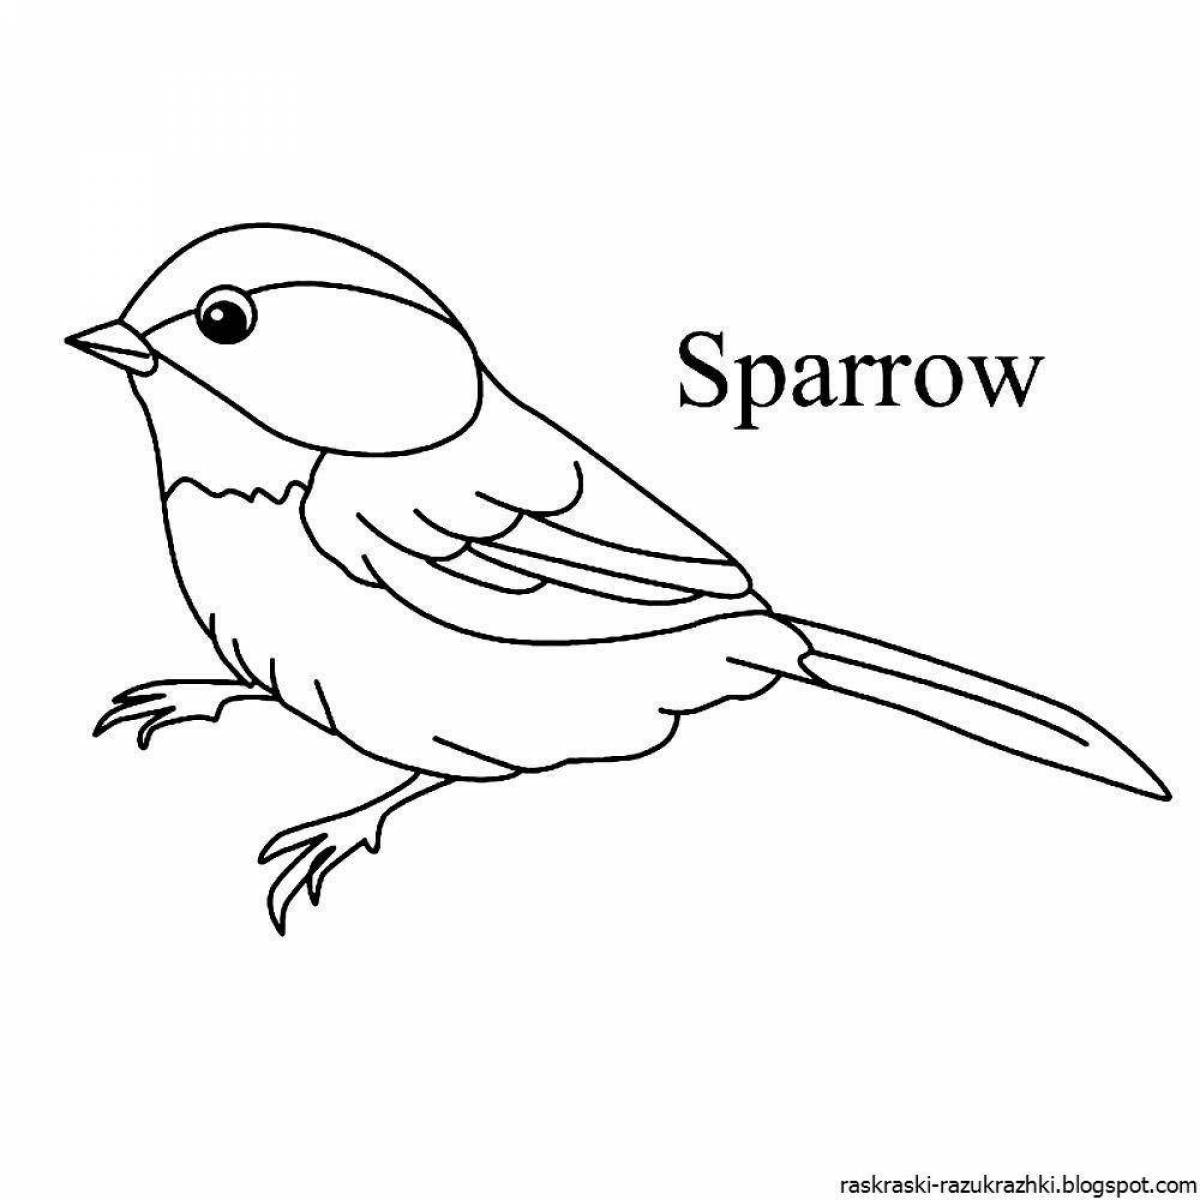 Coloring page glorious wintering sparrow